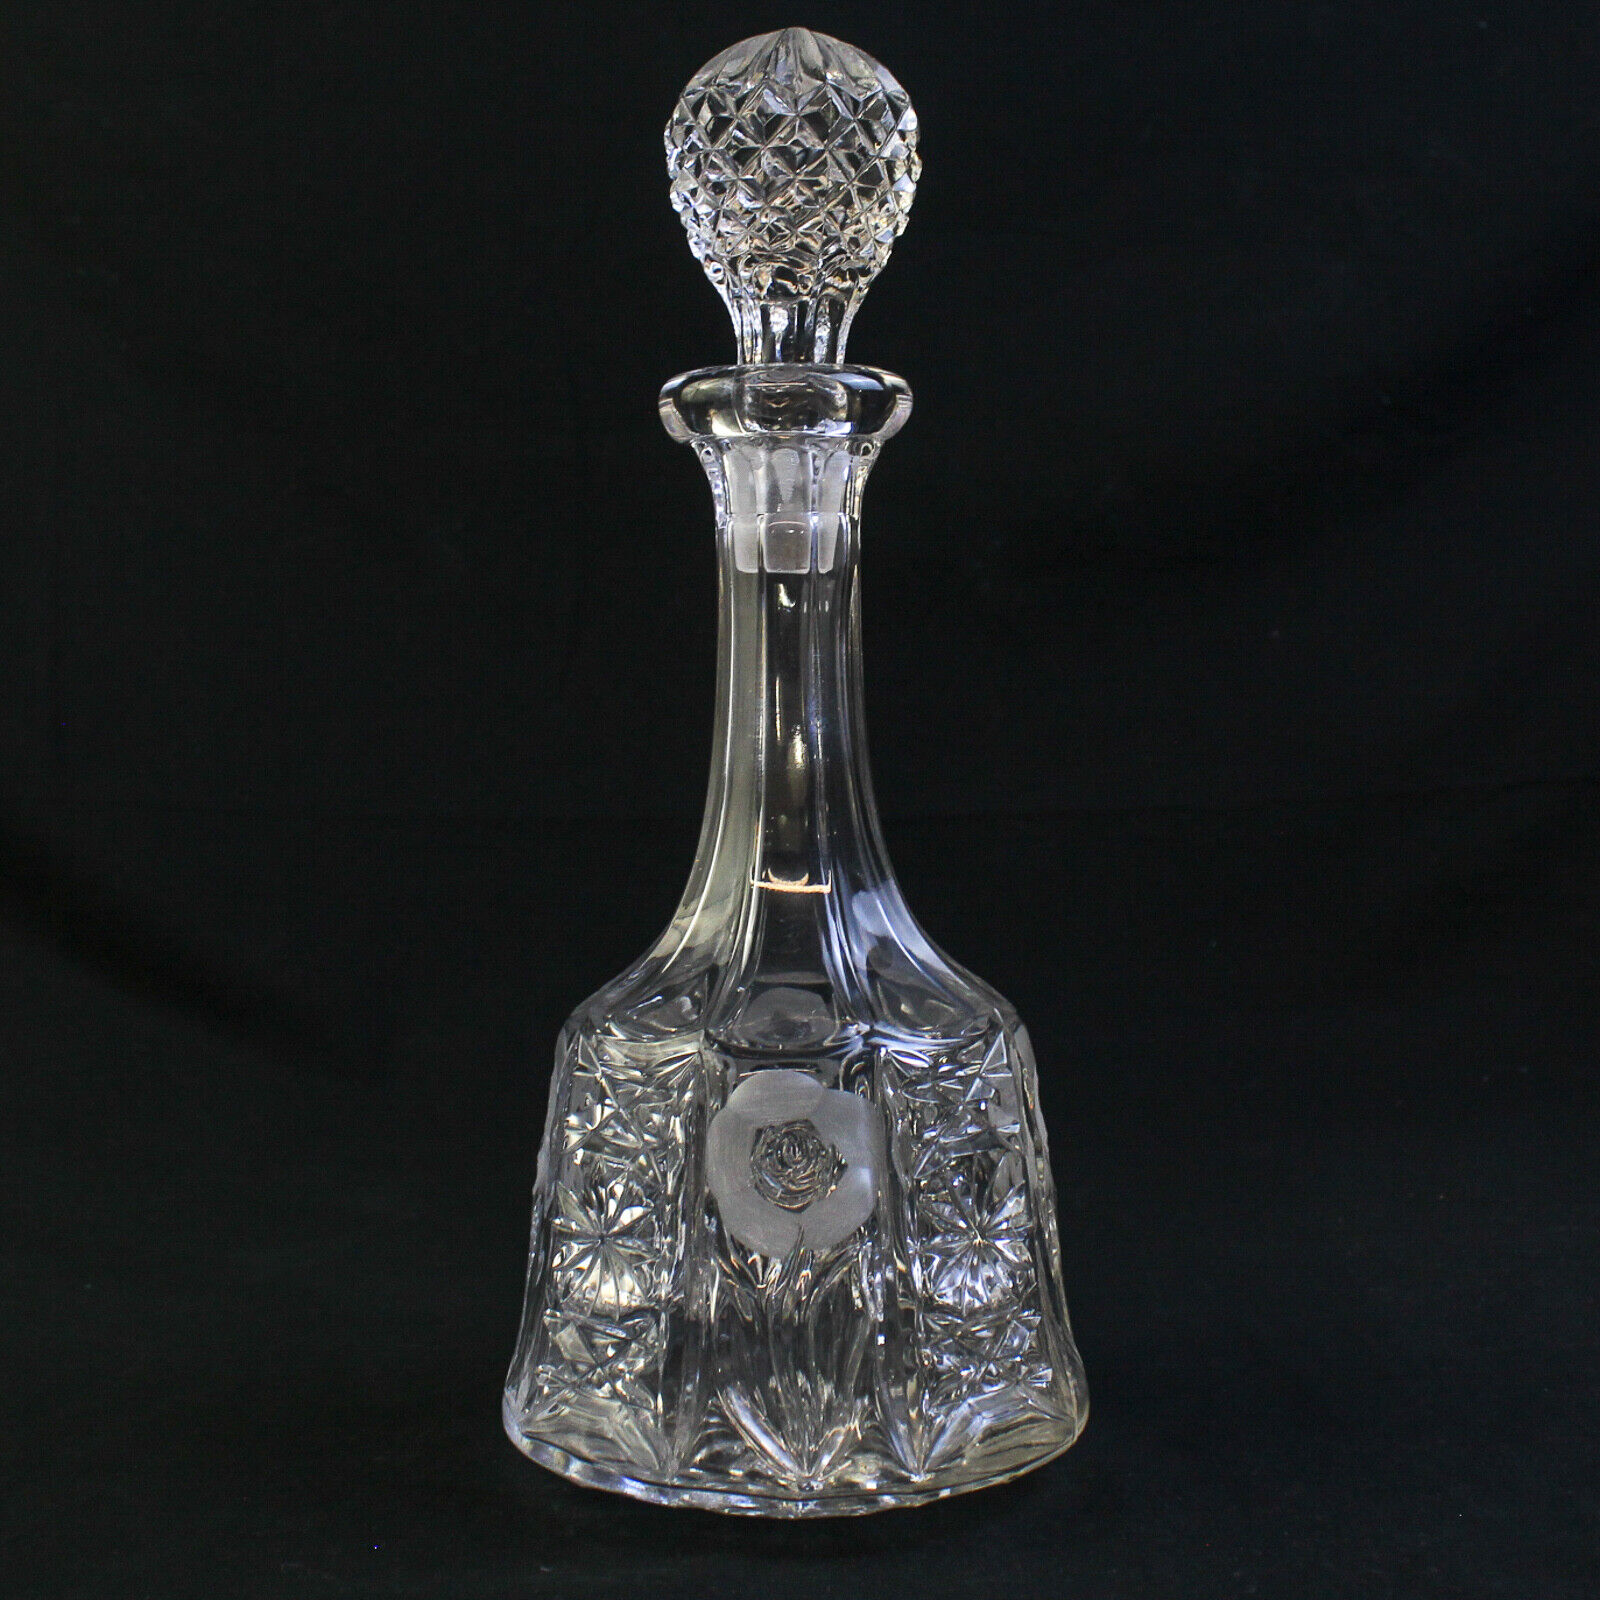 Vintage Heavy Cut Glass Crystal Wine Decanter With Stopper 12.5in Tall Decor